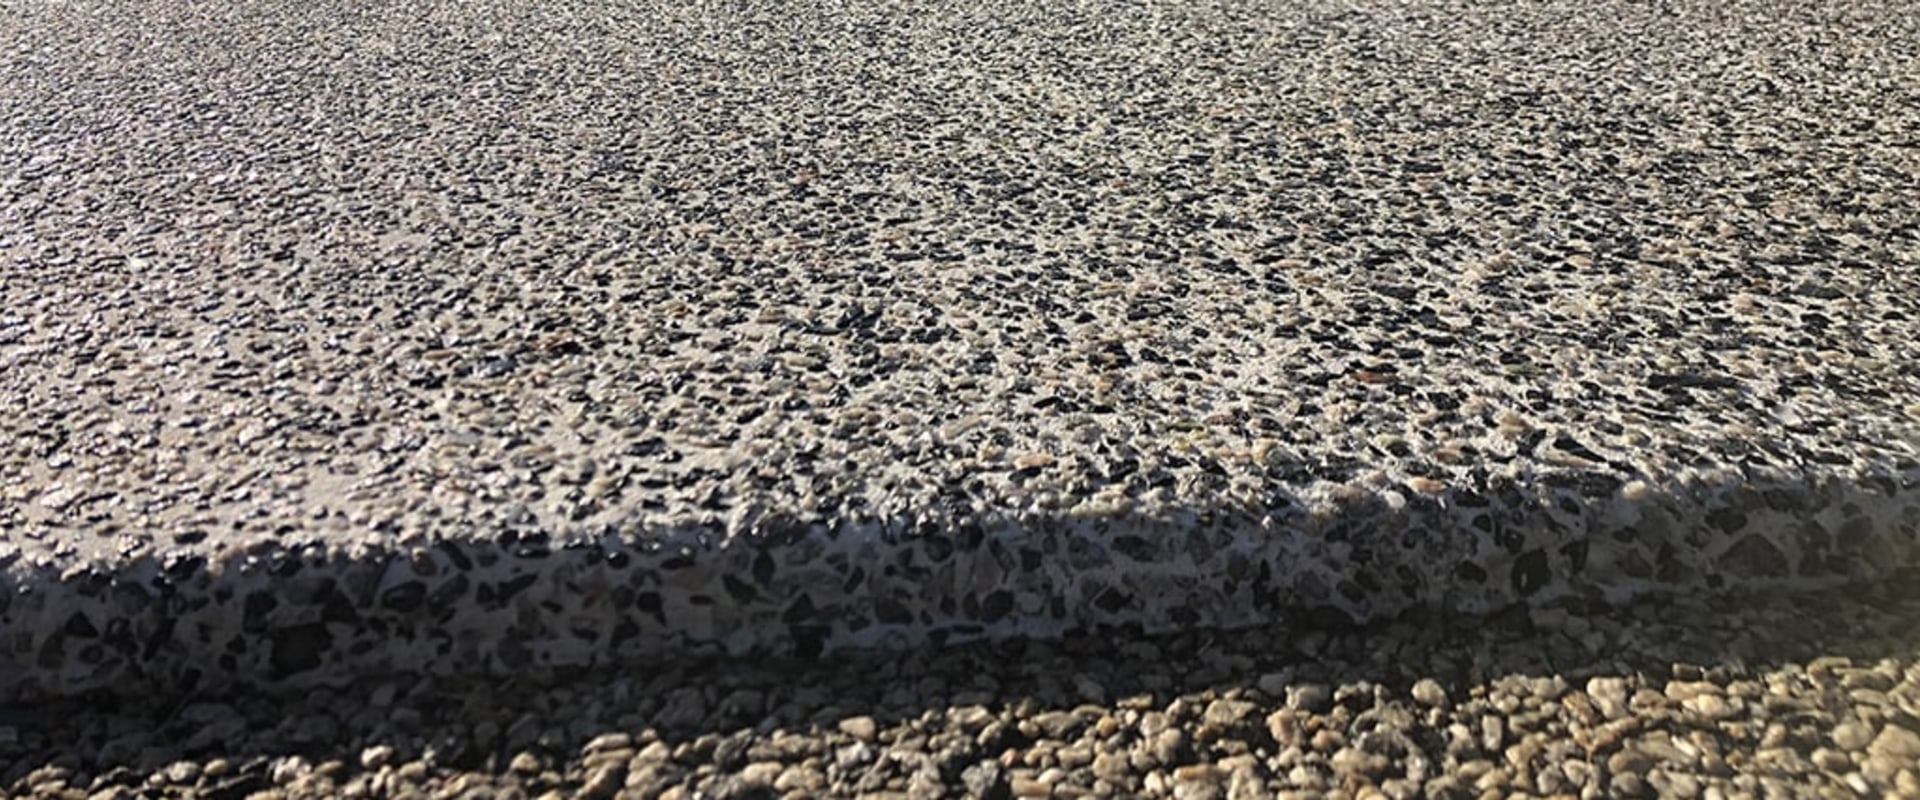 Does Exposed Aggregate Last Longer Than Concrete?